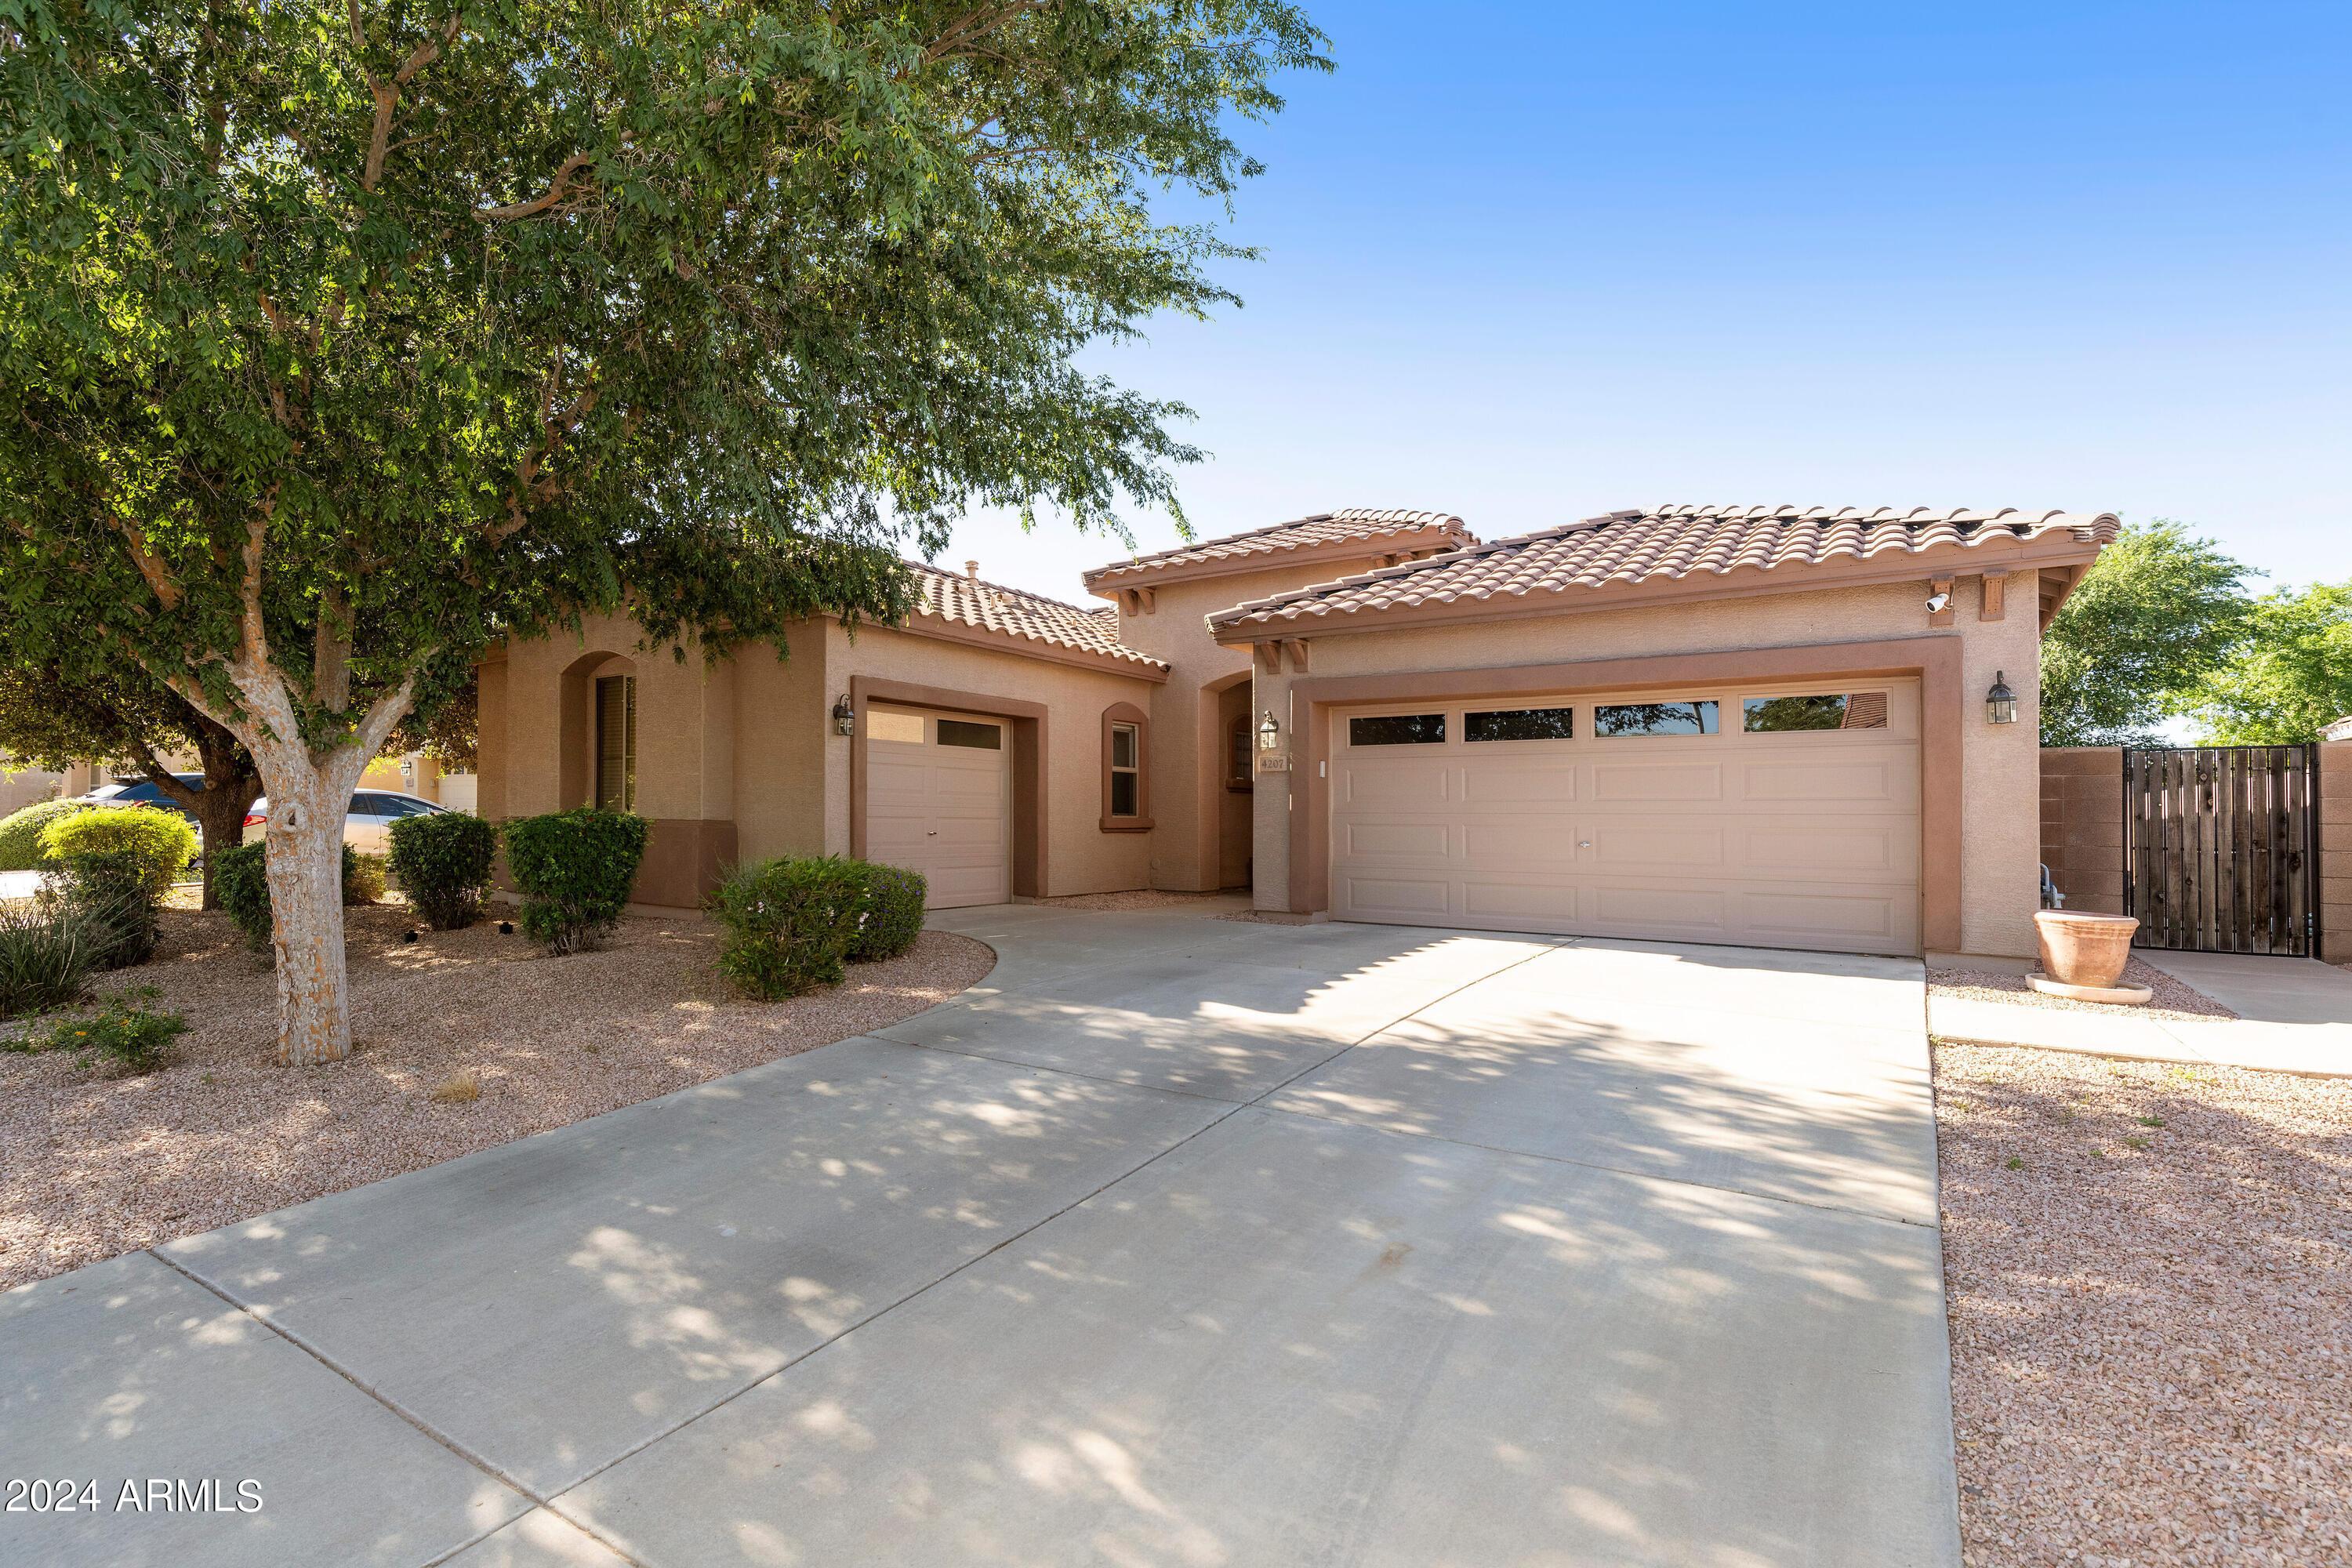 Photo one of 4207 E County Down Dr Chandler AZ 85249 | MLS 6696400